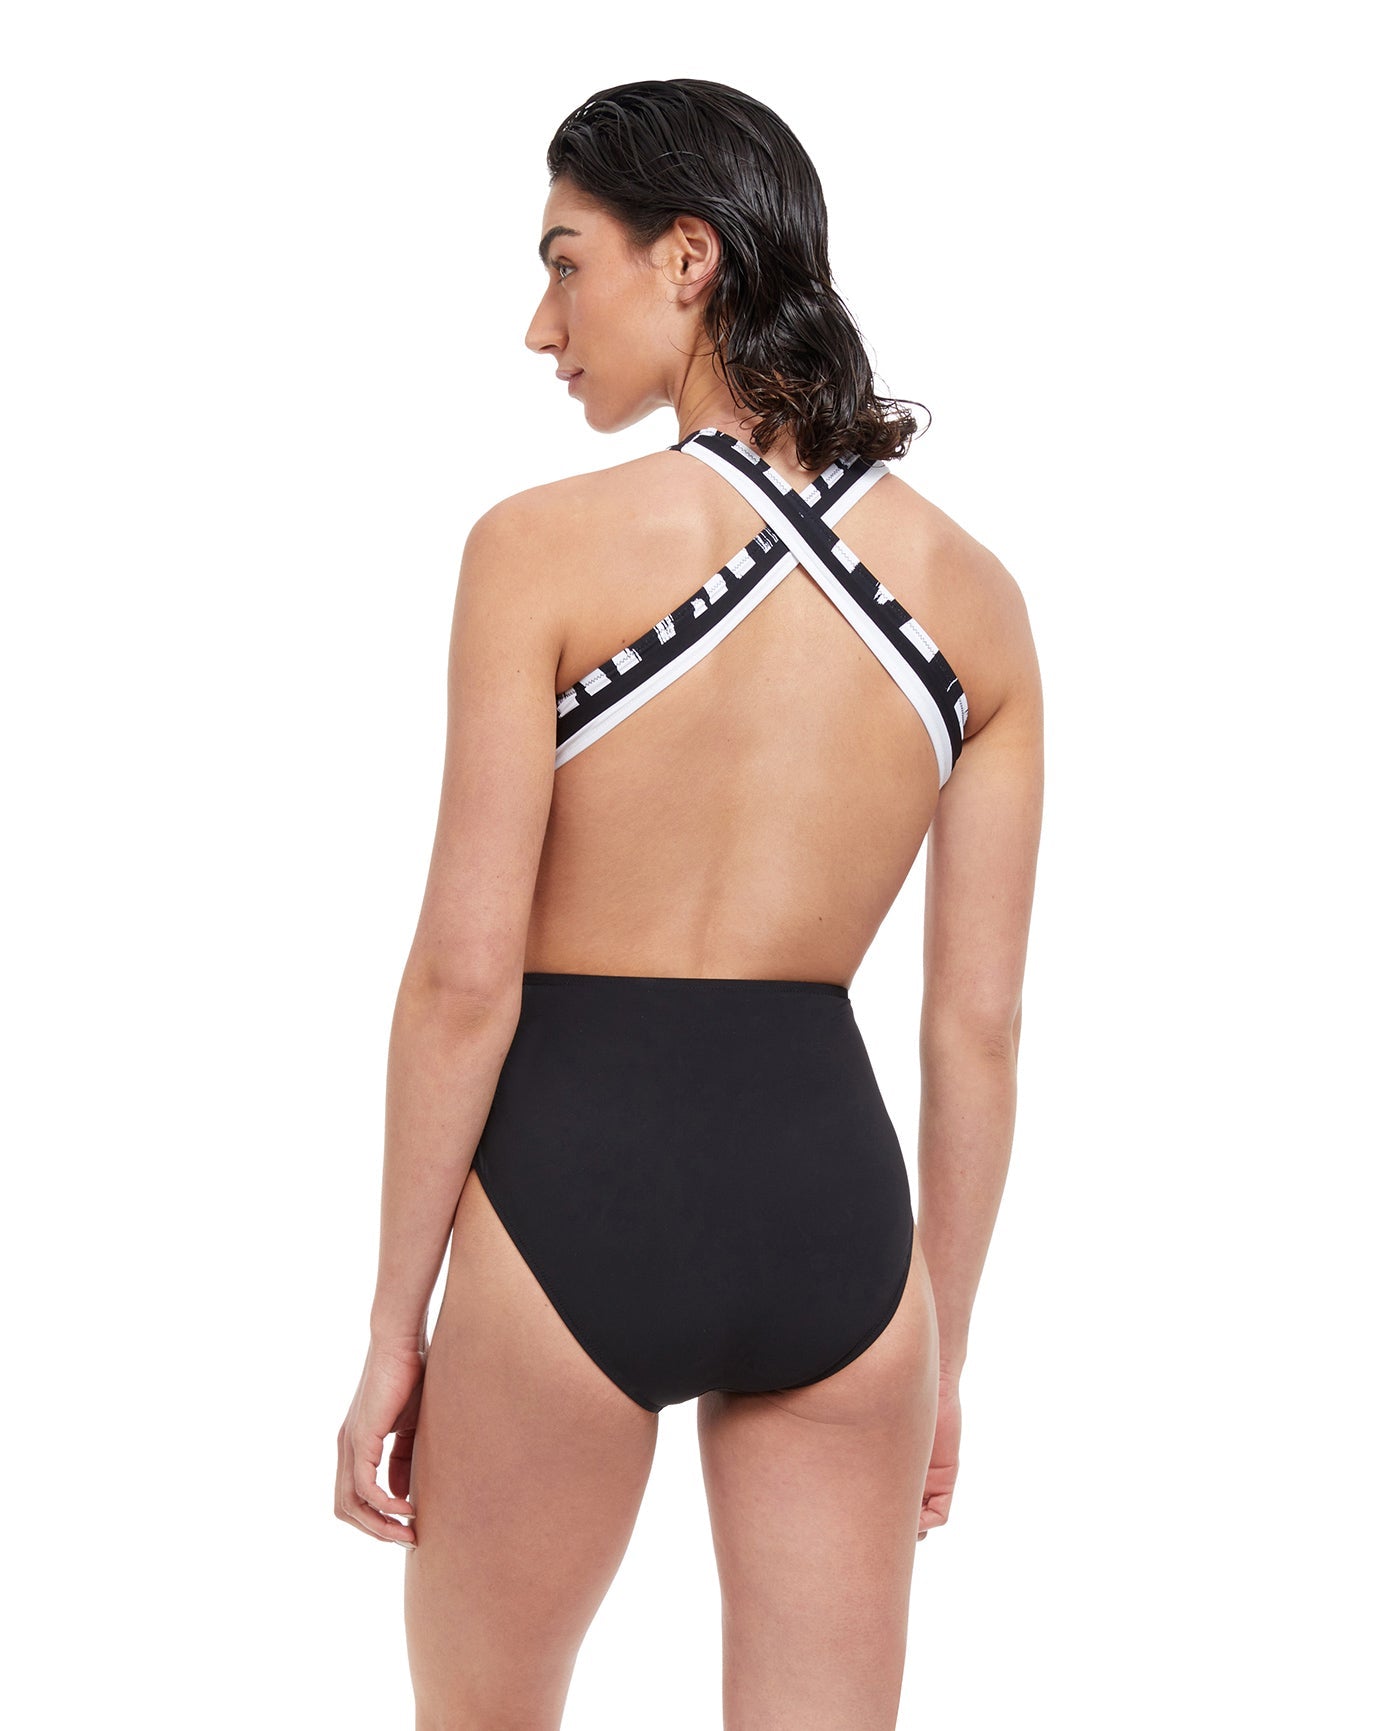 Back View Of Free Sport Upstream High Neck Cutout Crisscross Back One Piece Swimsuit | FREE SPORT UPSTREAM BLACK AND WHITE